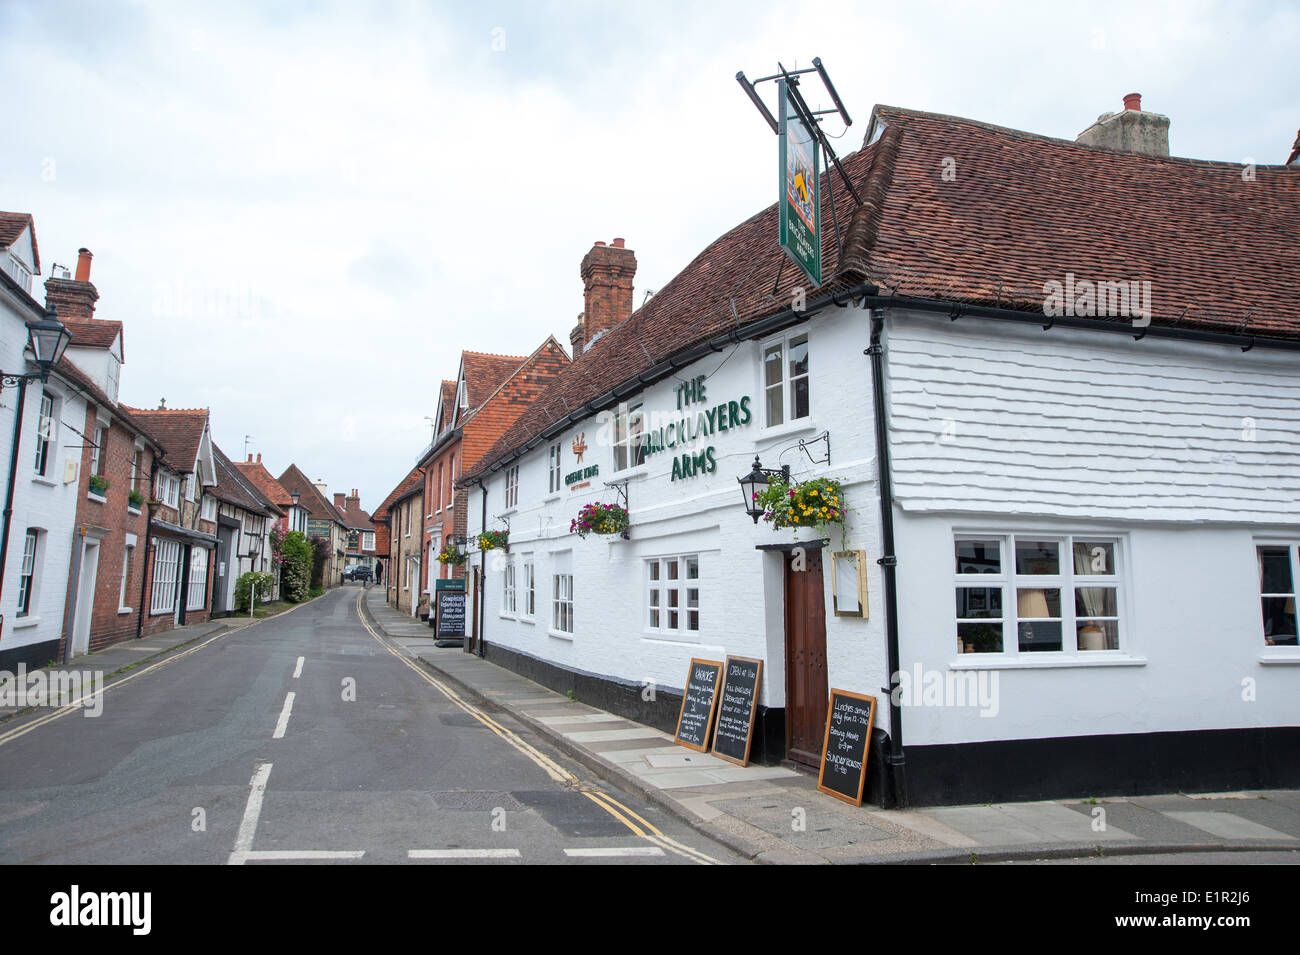 Midhurst West Sussex UK - The Bricklayers Arms Stock Photo